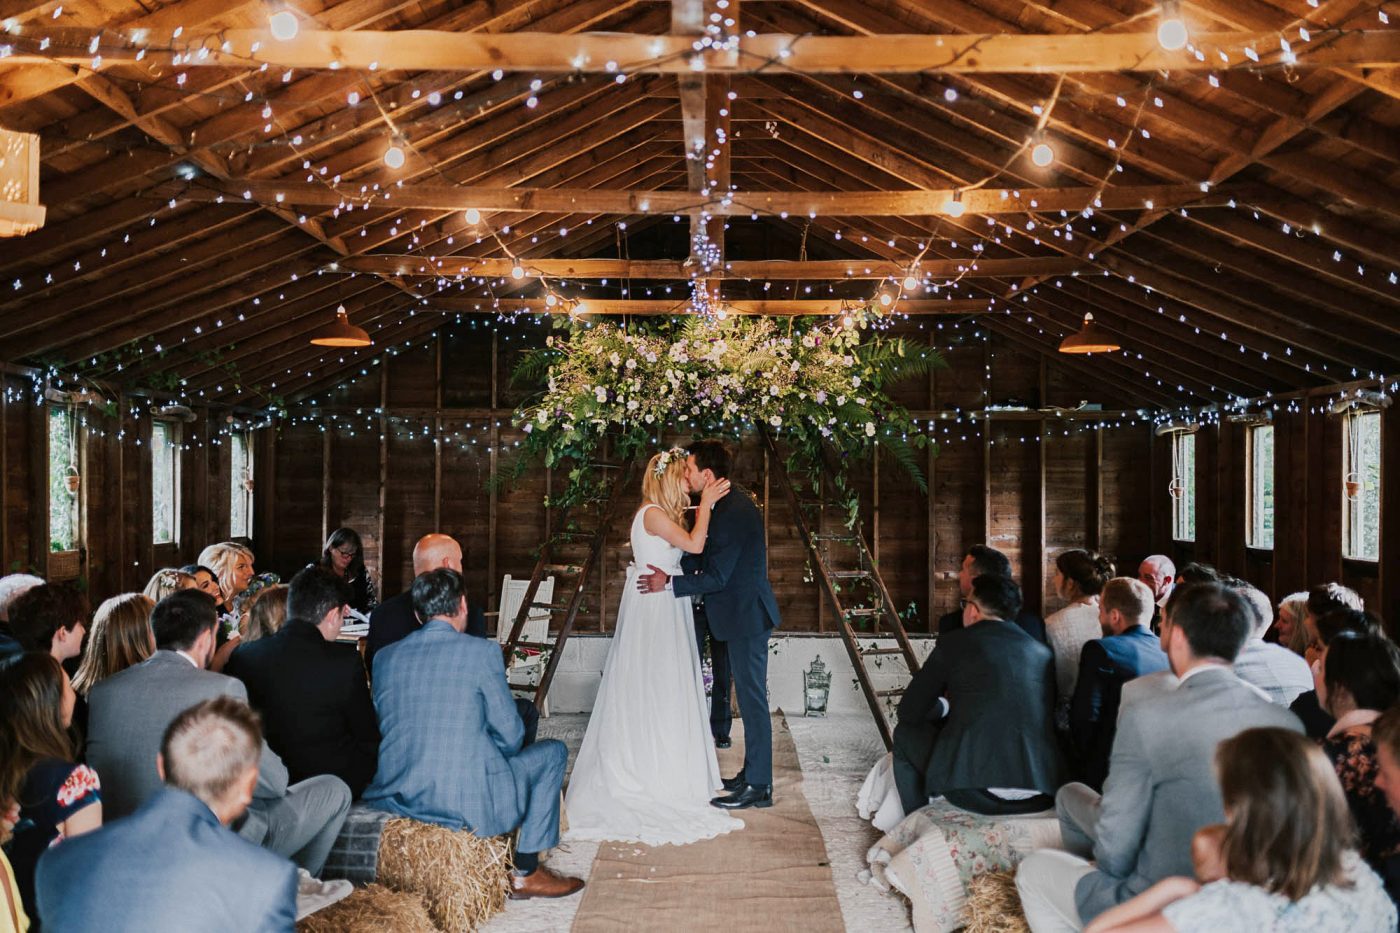 The Cow Shed Wedding Venue